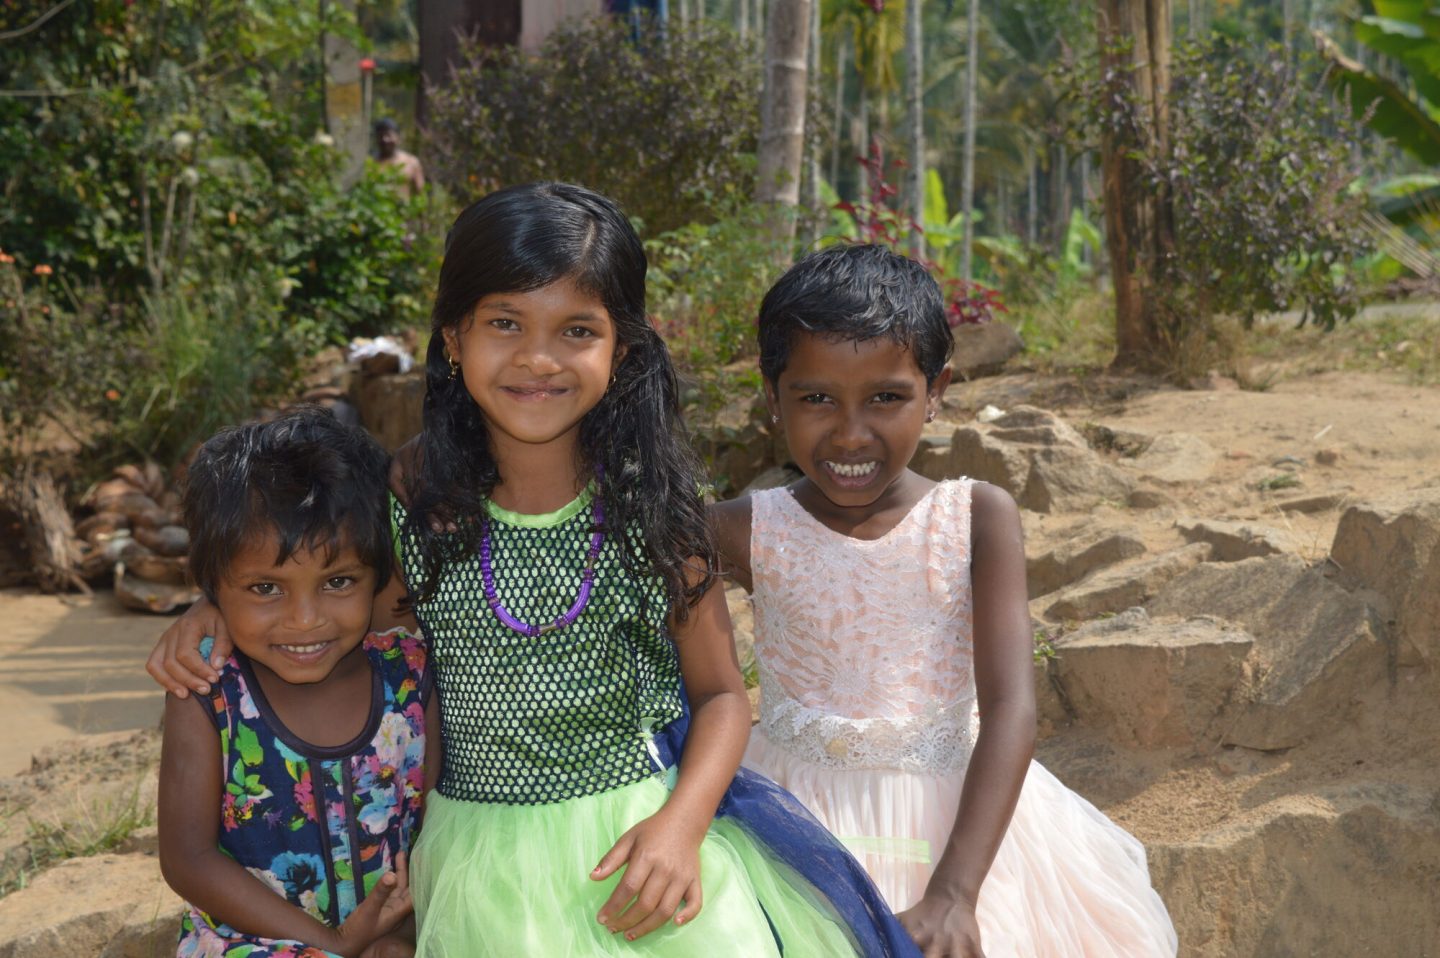 After the successful surgery: Soorya can finally be a normal child and play outside with other children.